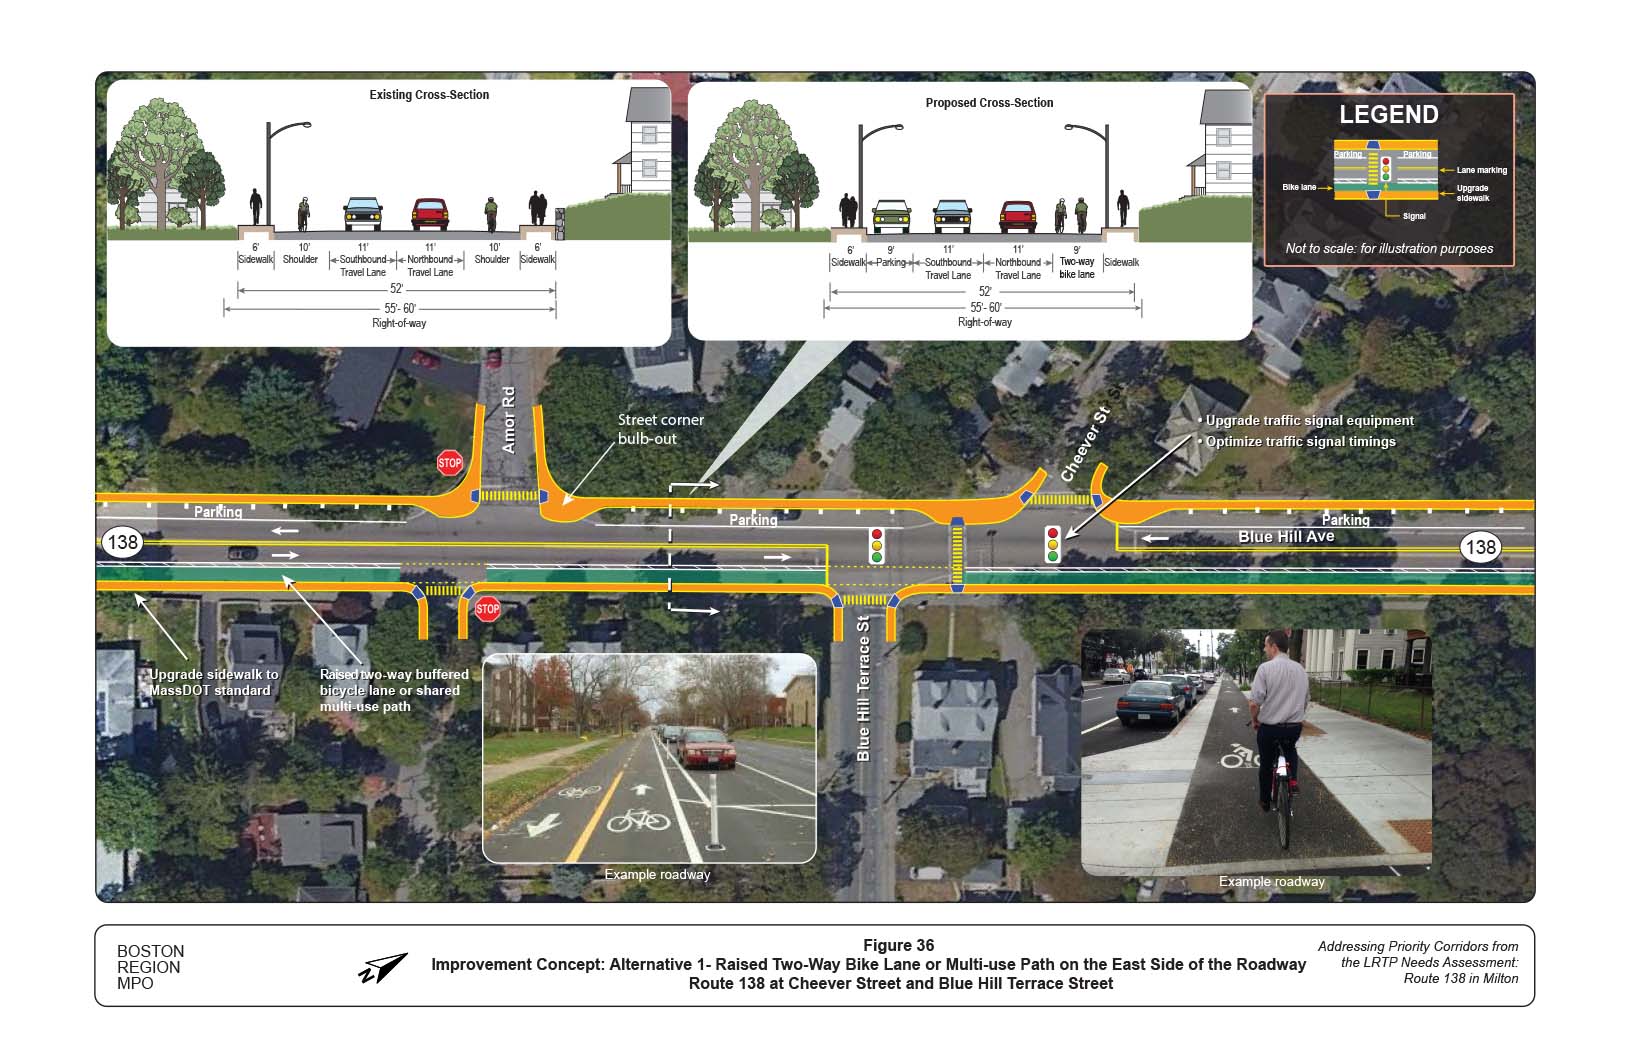 Figure 36 is an aerial photo of Route 138 at Cheever Street and Blue Hill Terrace Street showing Alternative 1, a two-way bicycle lane on the east side of the roadway, on-street parking on the west side, and overlays showing the existing and proposed cross-sections.